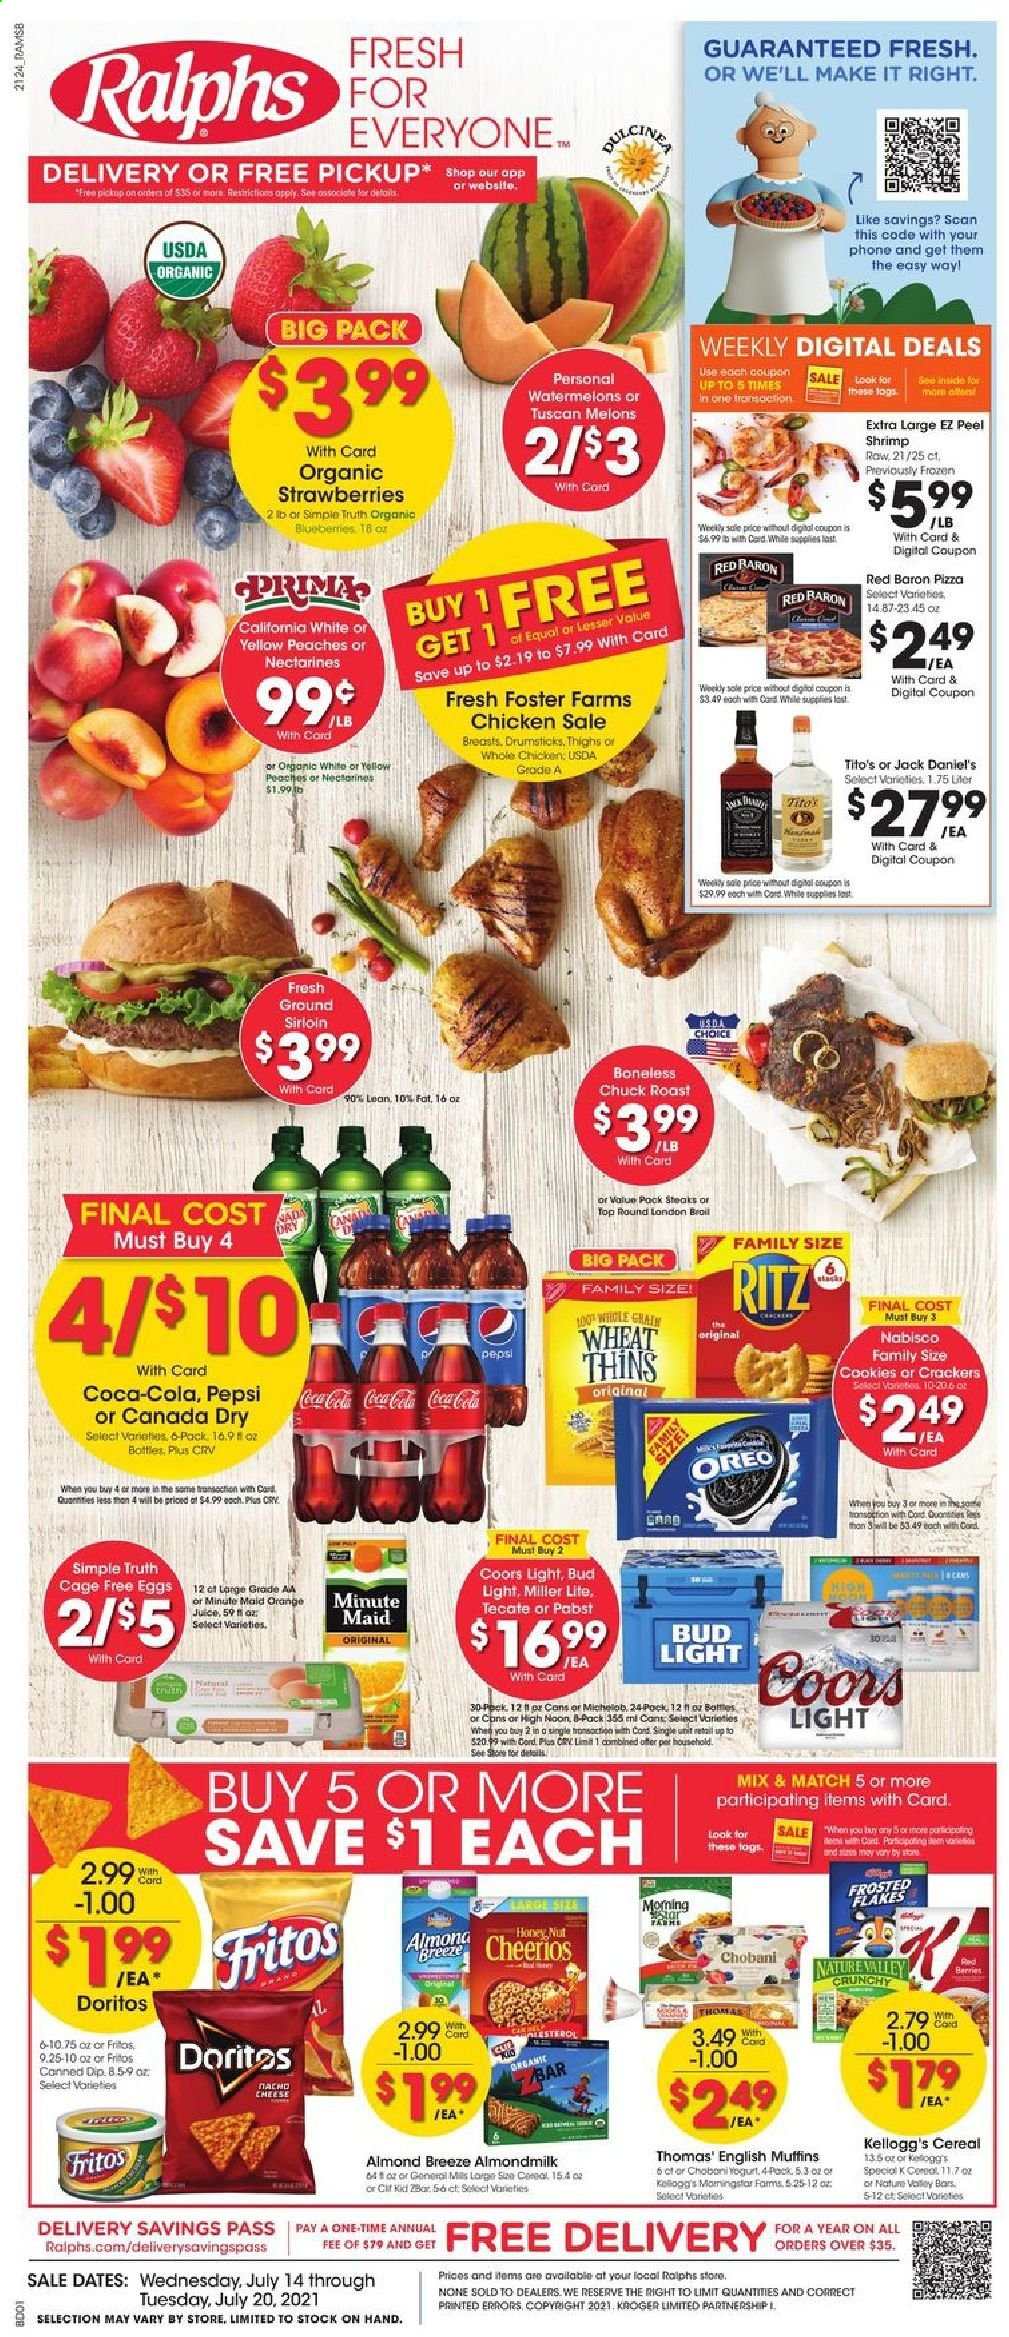 thumbnail - Ralphs Flyer - 07/14/2021 - 07/20/2021 - Sales products - english muffins, strawberries, shrimps, Jack Daniel's, pizza, Oreo, yoghurt, Chobani, almond milk, Almond Breeze, eggs, cage free eggs, dip, Red Baron, cookies, crackers, Kellogg's, RITZ, Doritos, Fritos, Thins, cereals, Cheerios, Nature Valley, Canada Dry, Coca-Cola, Pepsi, orange juice, juice, fruit punch, beer, Miller Lite, Coors, Bud Light, whole chicken, beef meat, steak, chuck roast, nectarines, melons, peaches. Page 1.